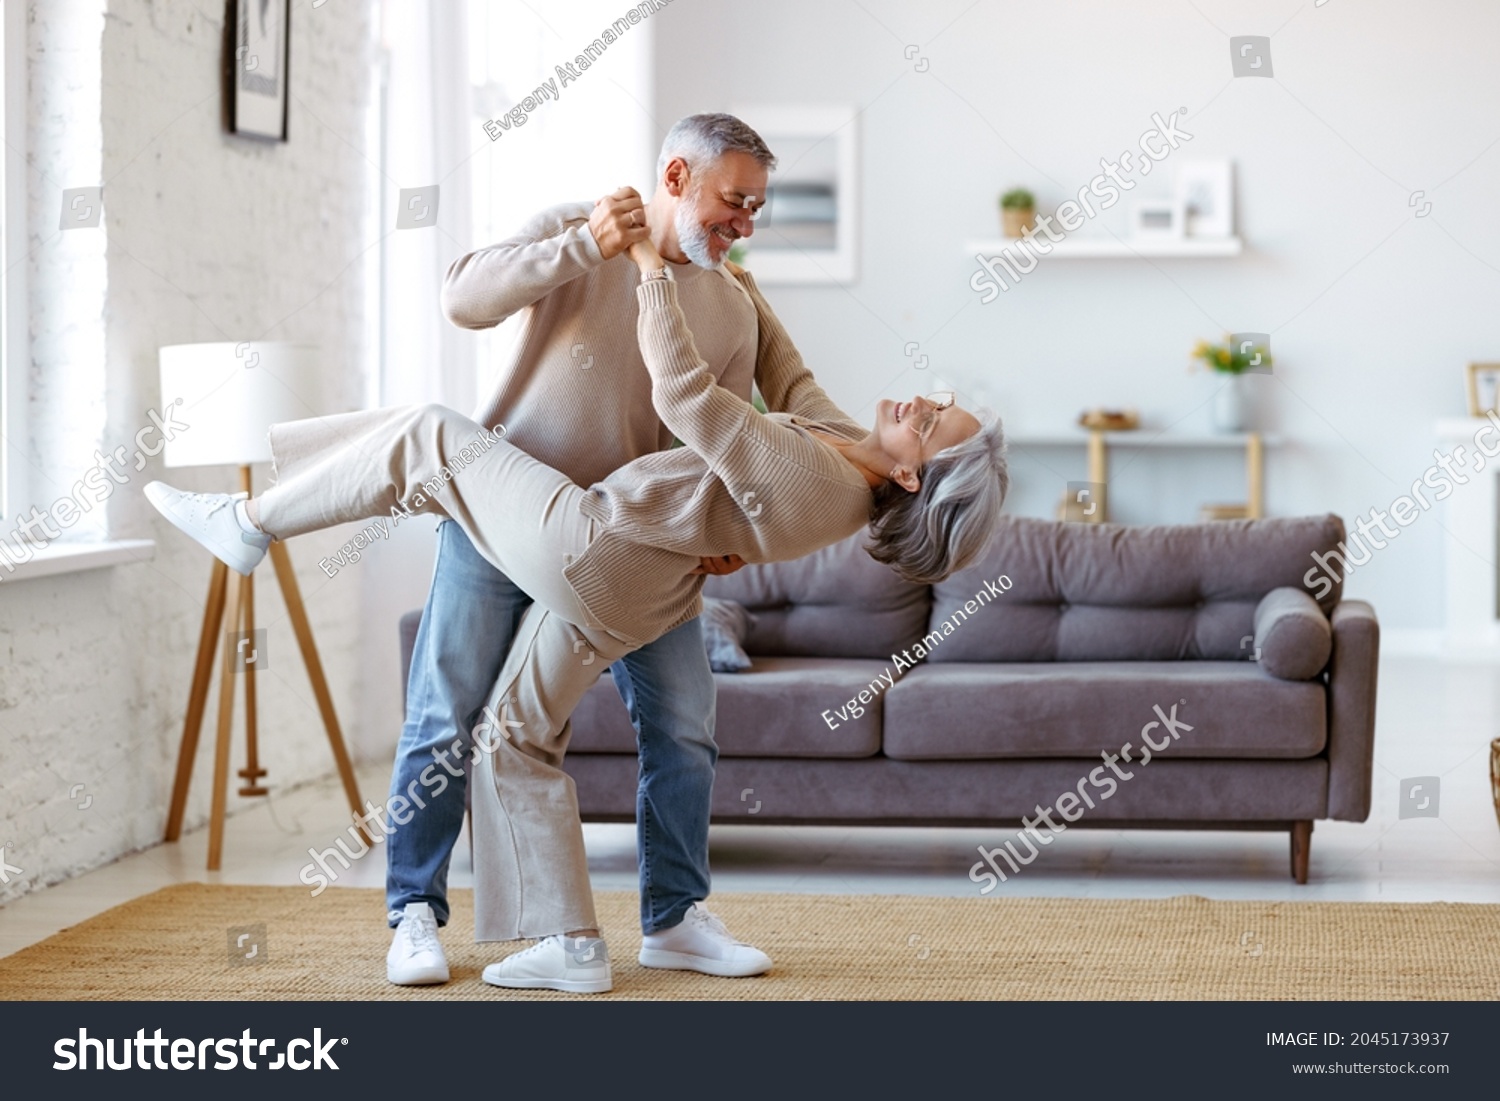 Keep moving. Romantic senior family couple wife and husband dancing to music together in living room, smiling laughing retired man and woman having fun, enjoying free time together at home #2045173937